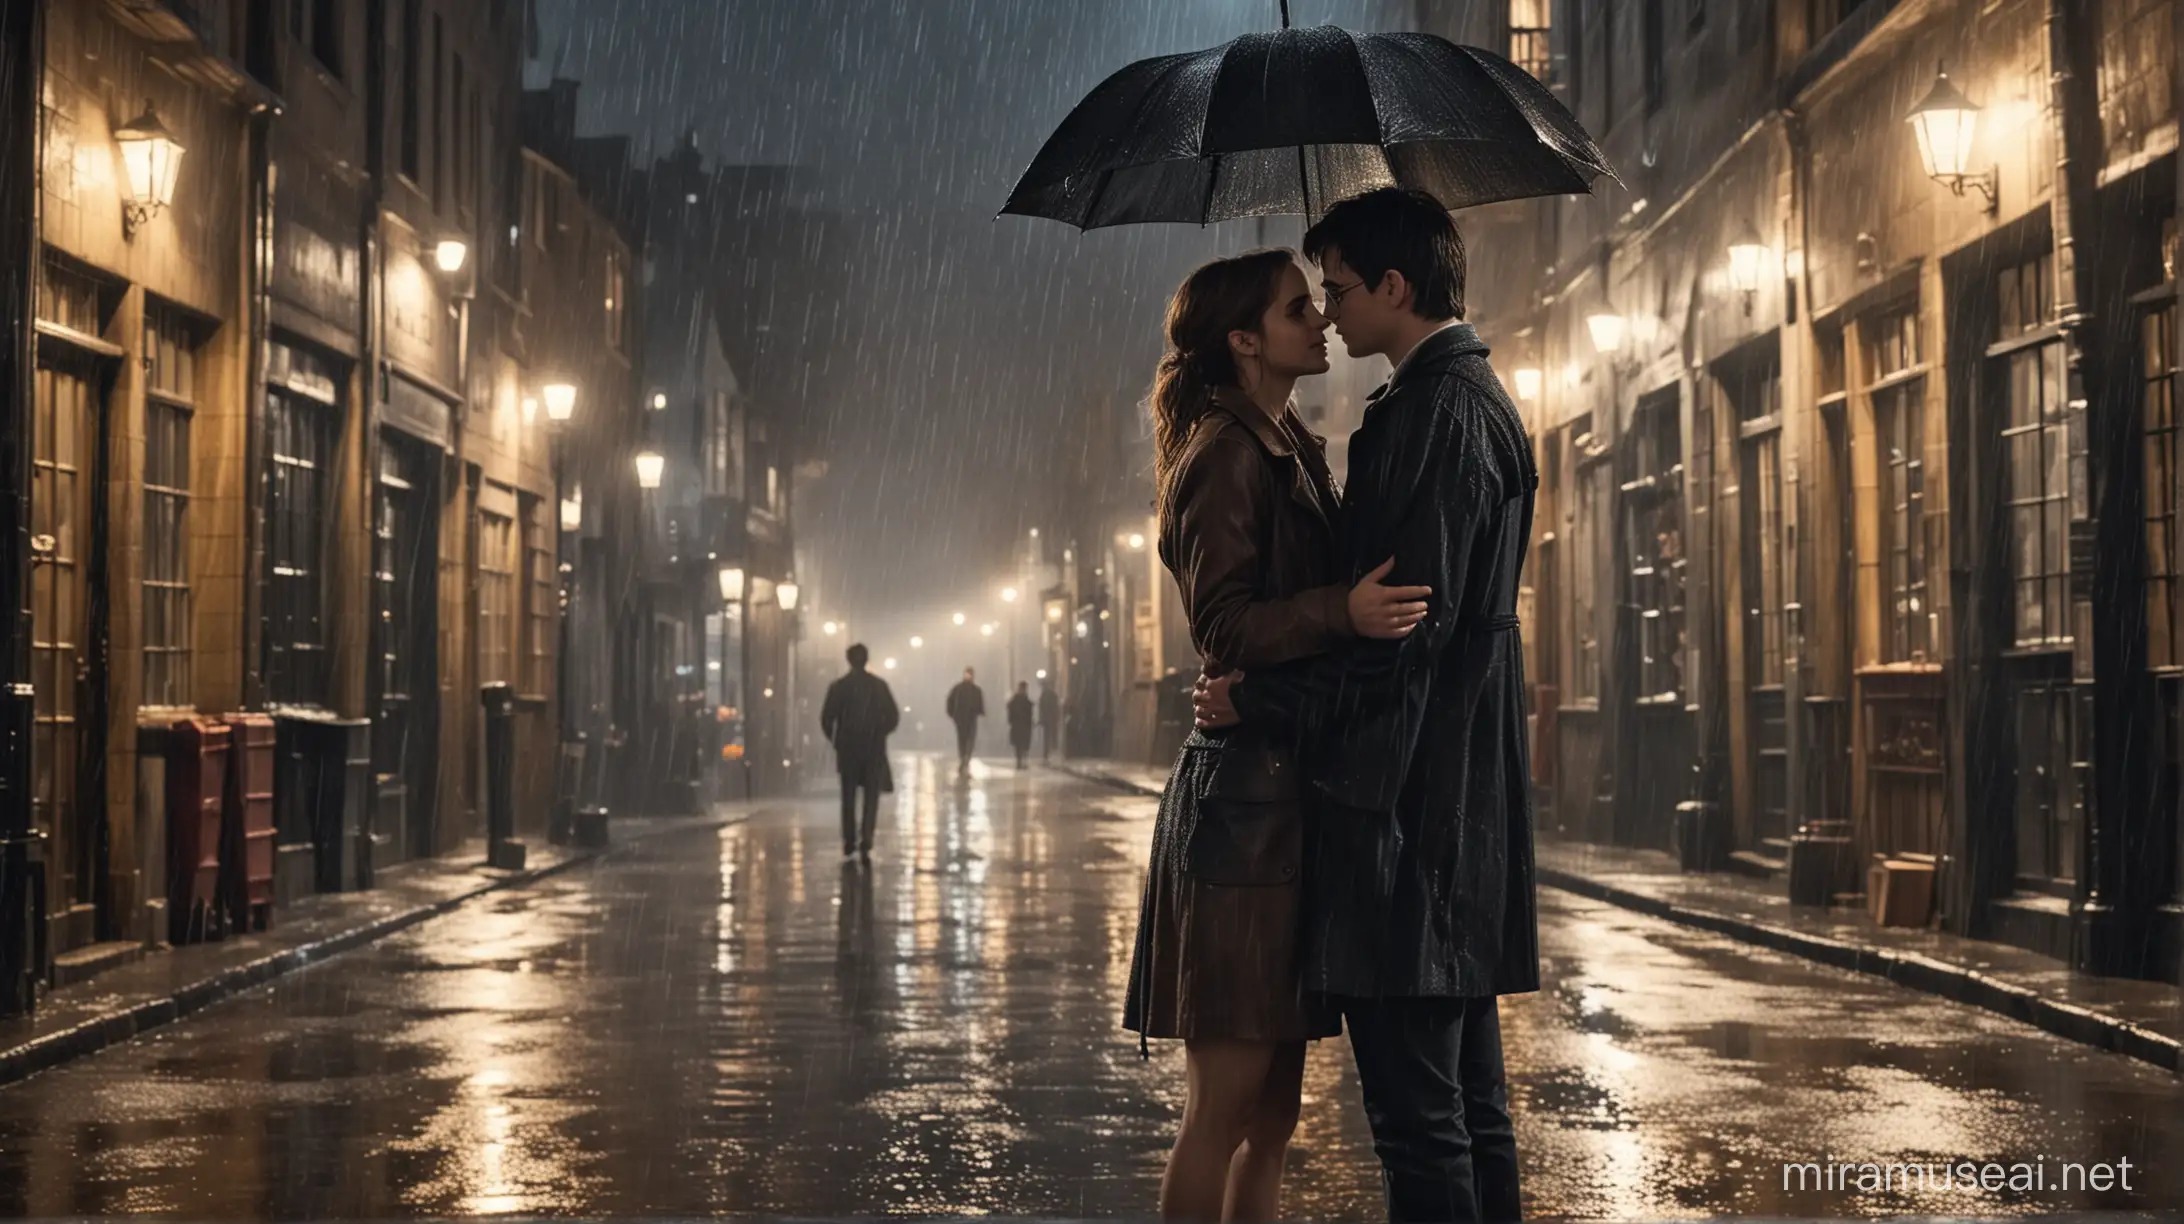 Emma Watson and Harry Potter, couple standing in the rain facing each other, romantic, urban street night setting